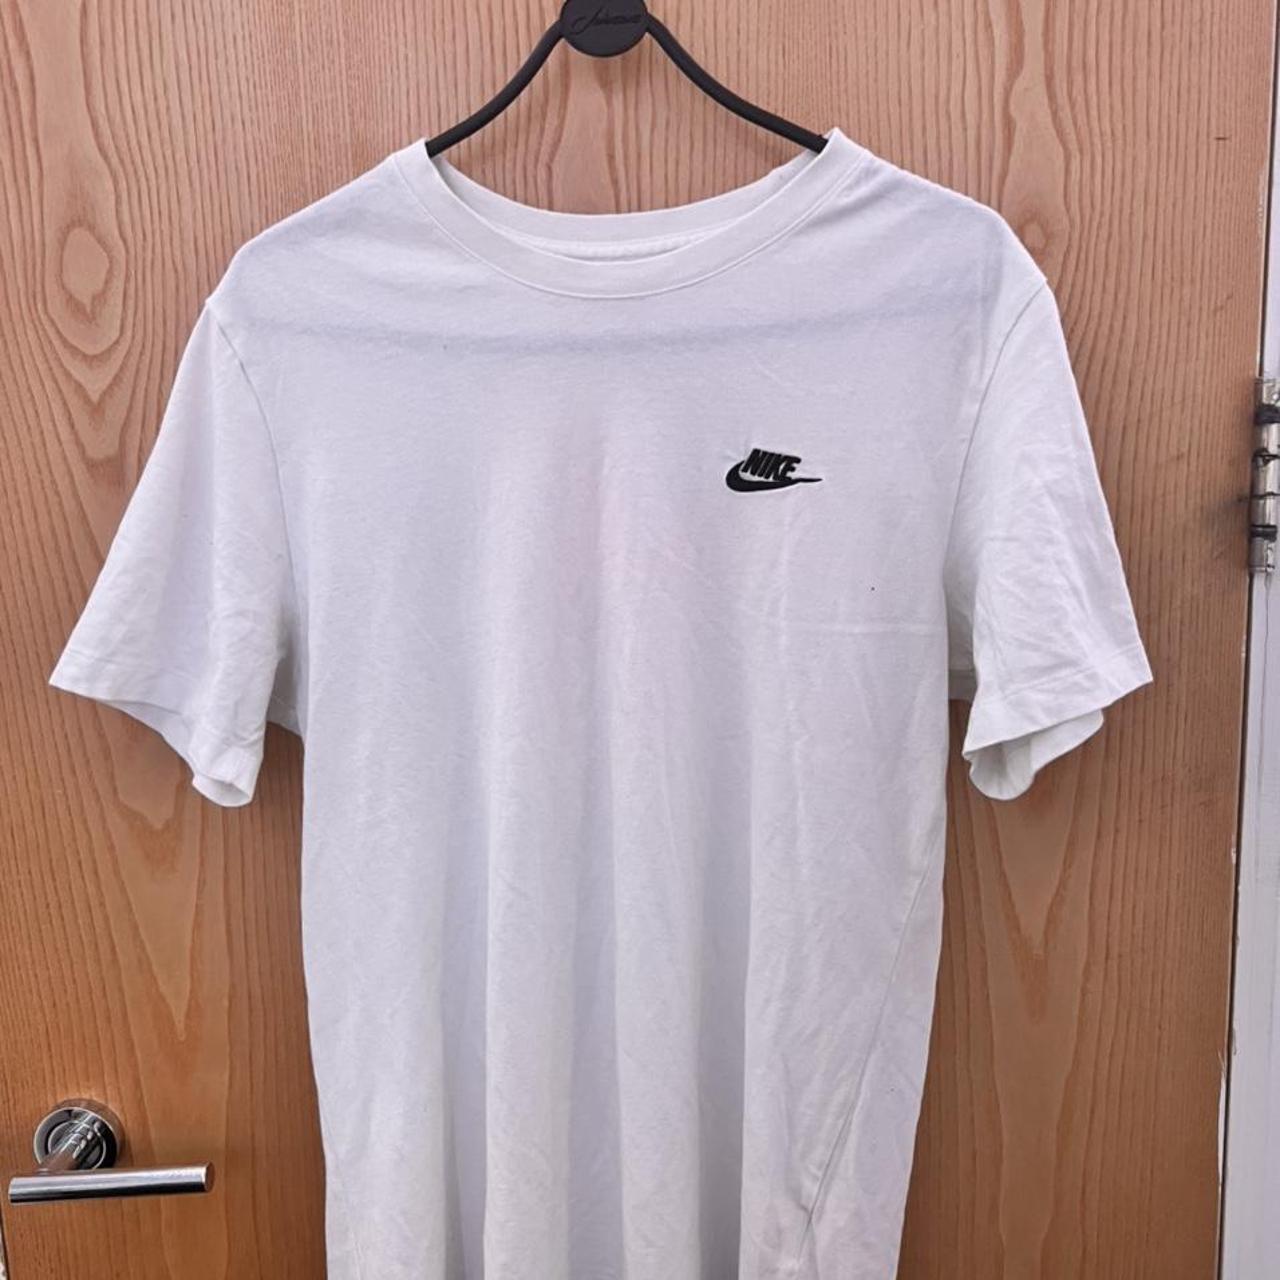 The Nike tee t-shirt - M. Never worn, just want it... - Depop